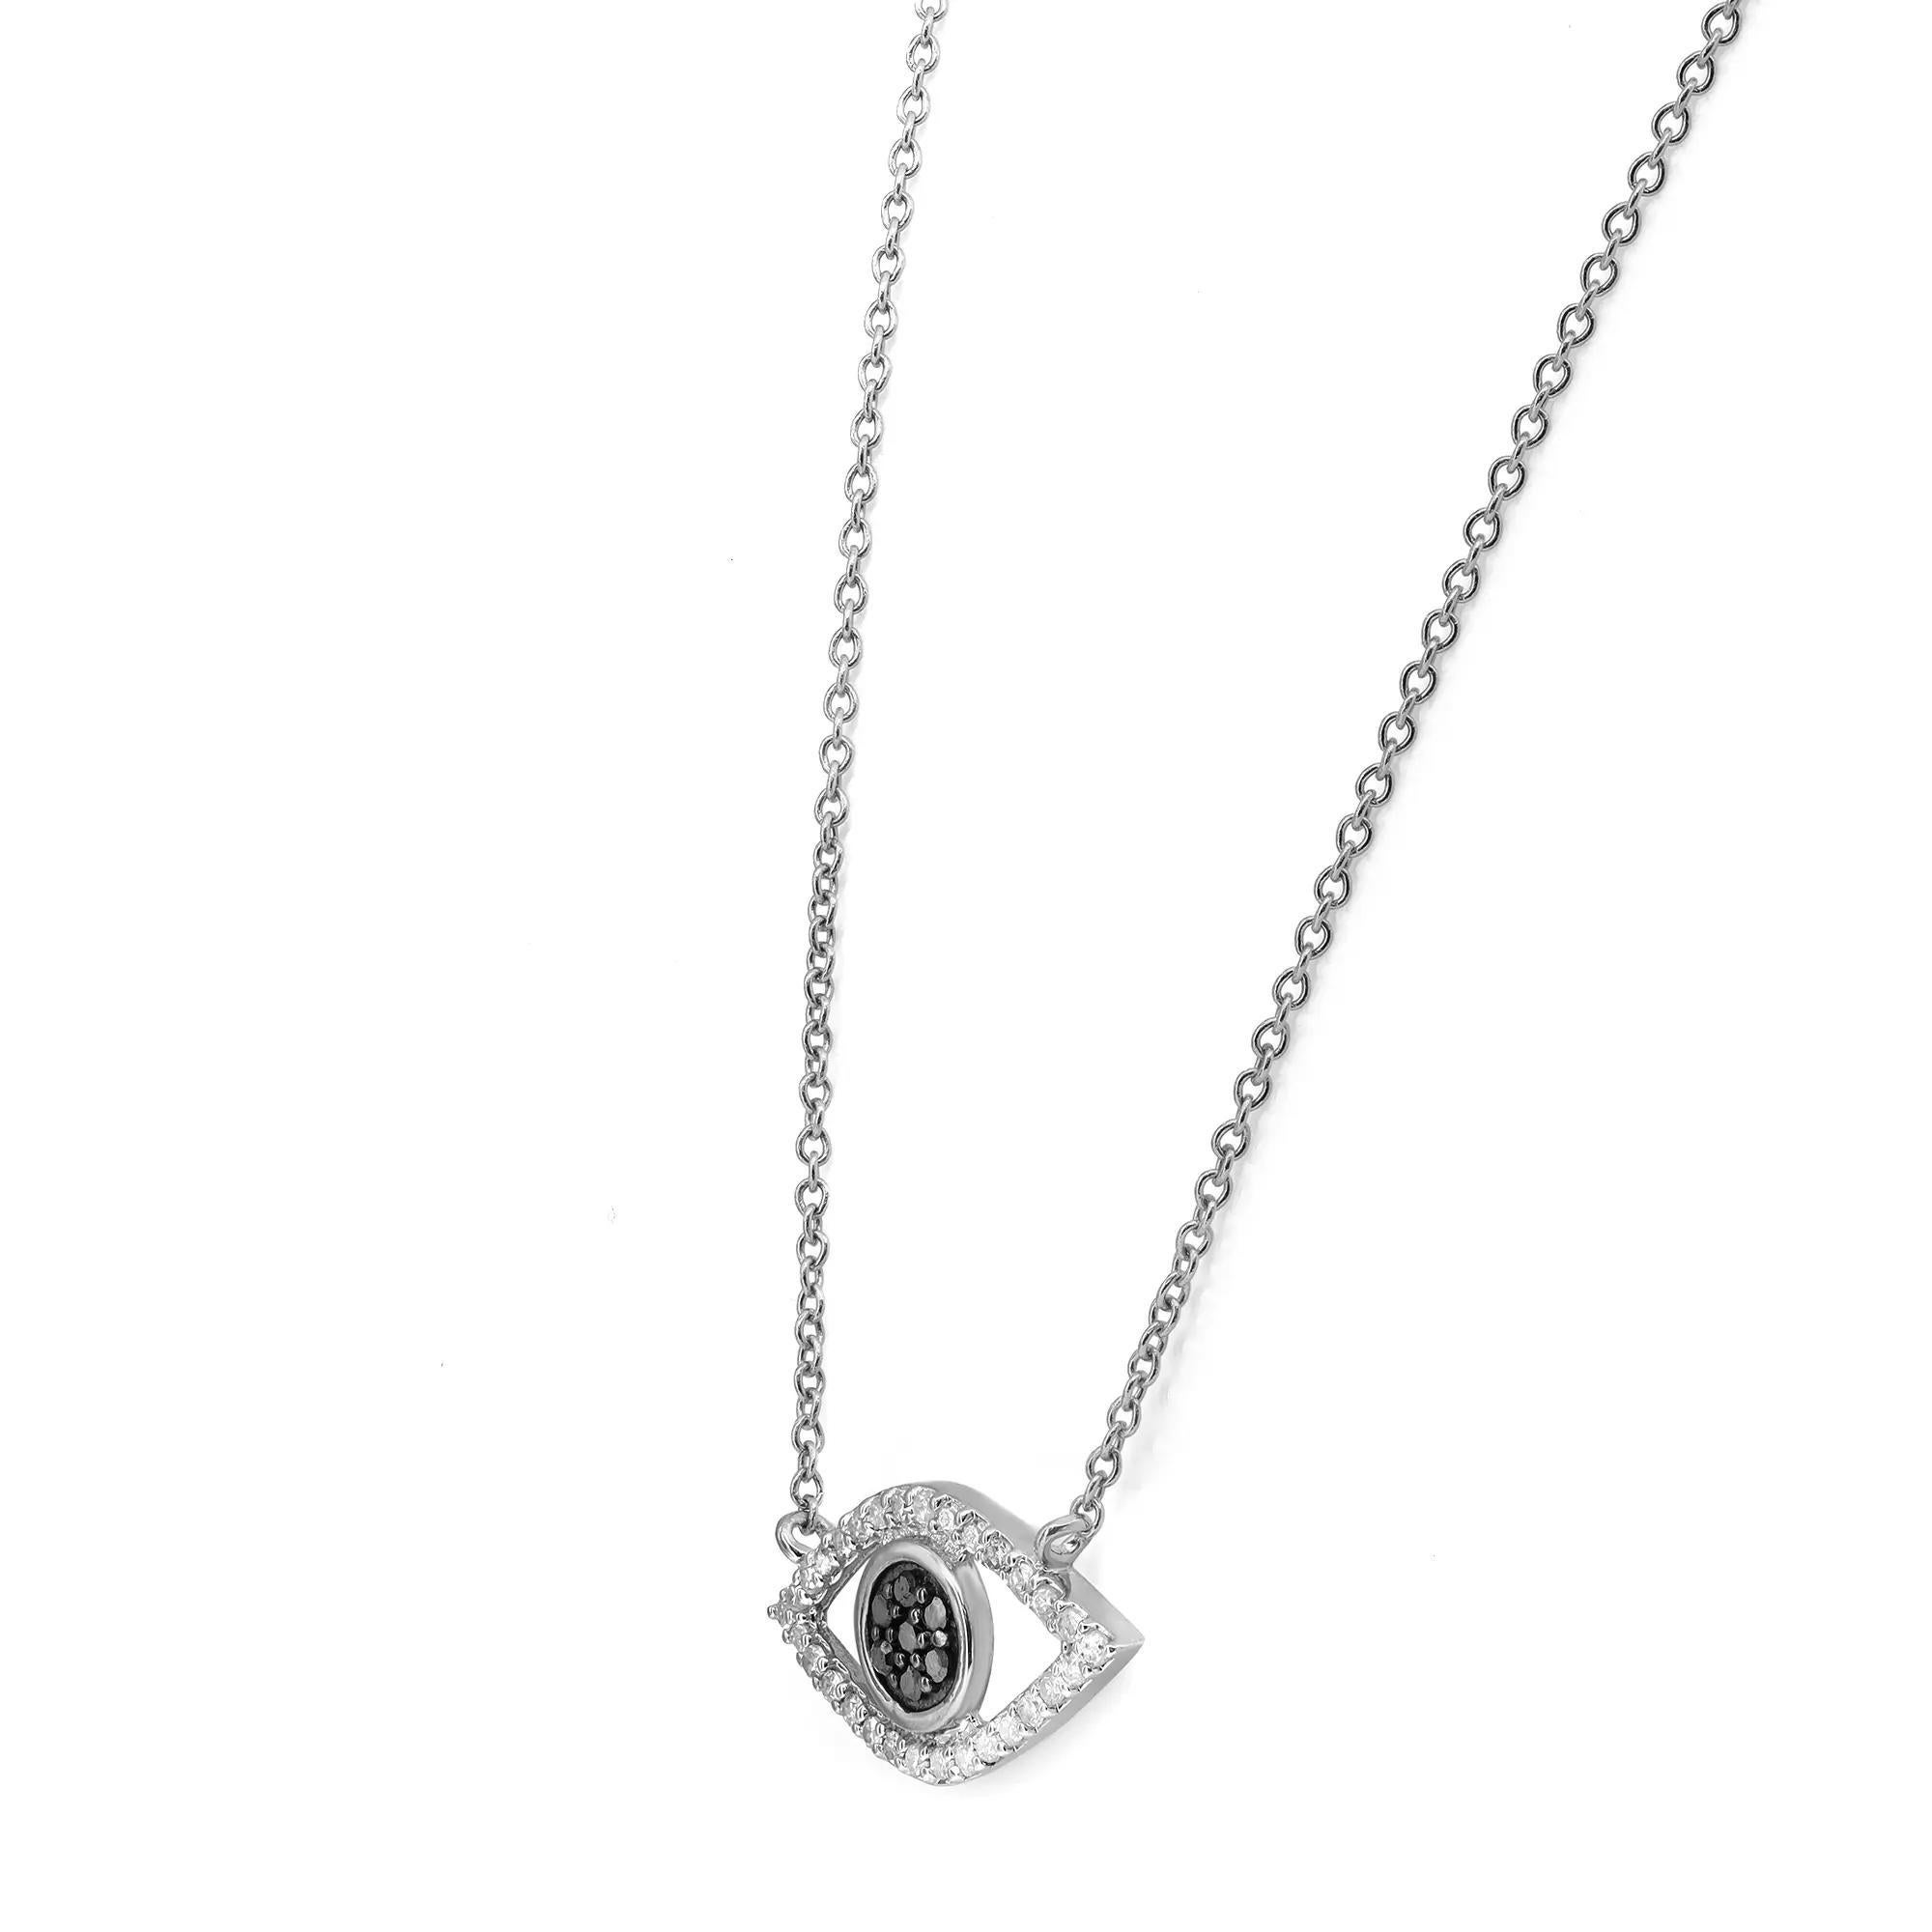 Chic, timeless, and the perfect everyday necklace. Crafted in 14k white gold. This necklace features an evil eye pendant studded with pave set black diamonds in the center round shank with white diamonds on the eye shape outline. Total diamond